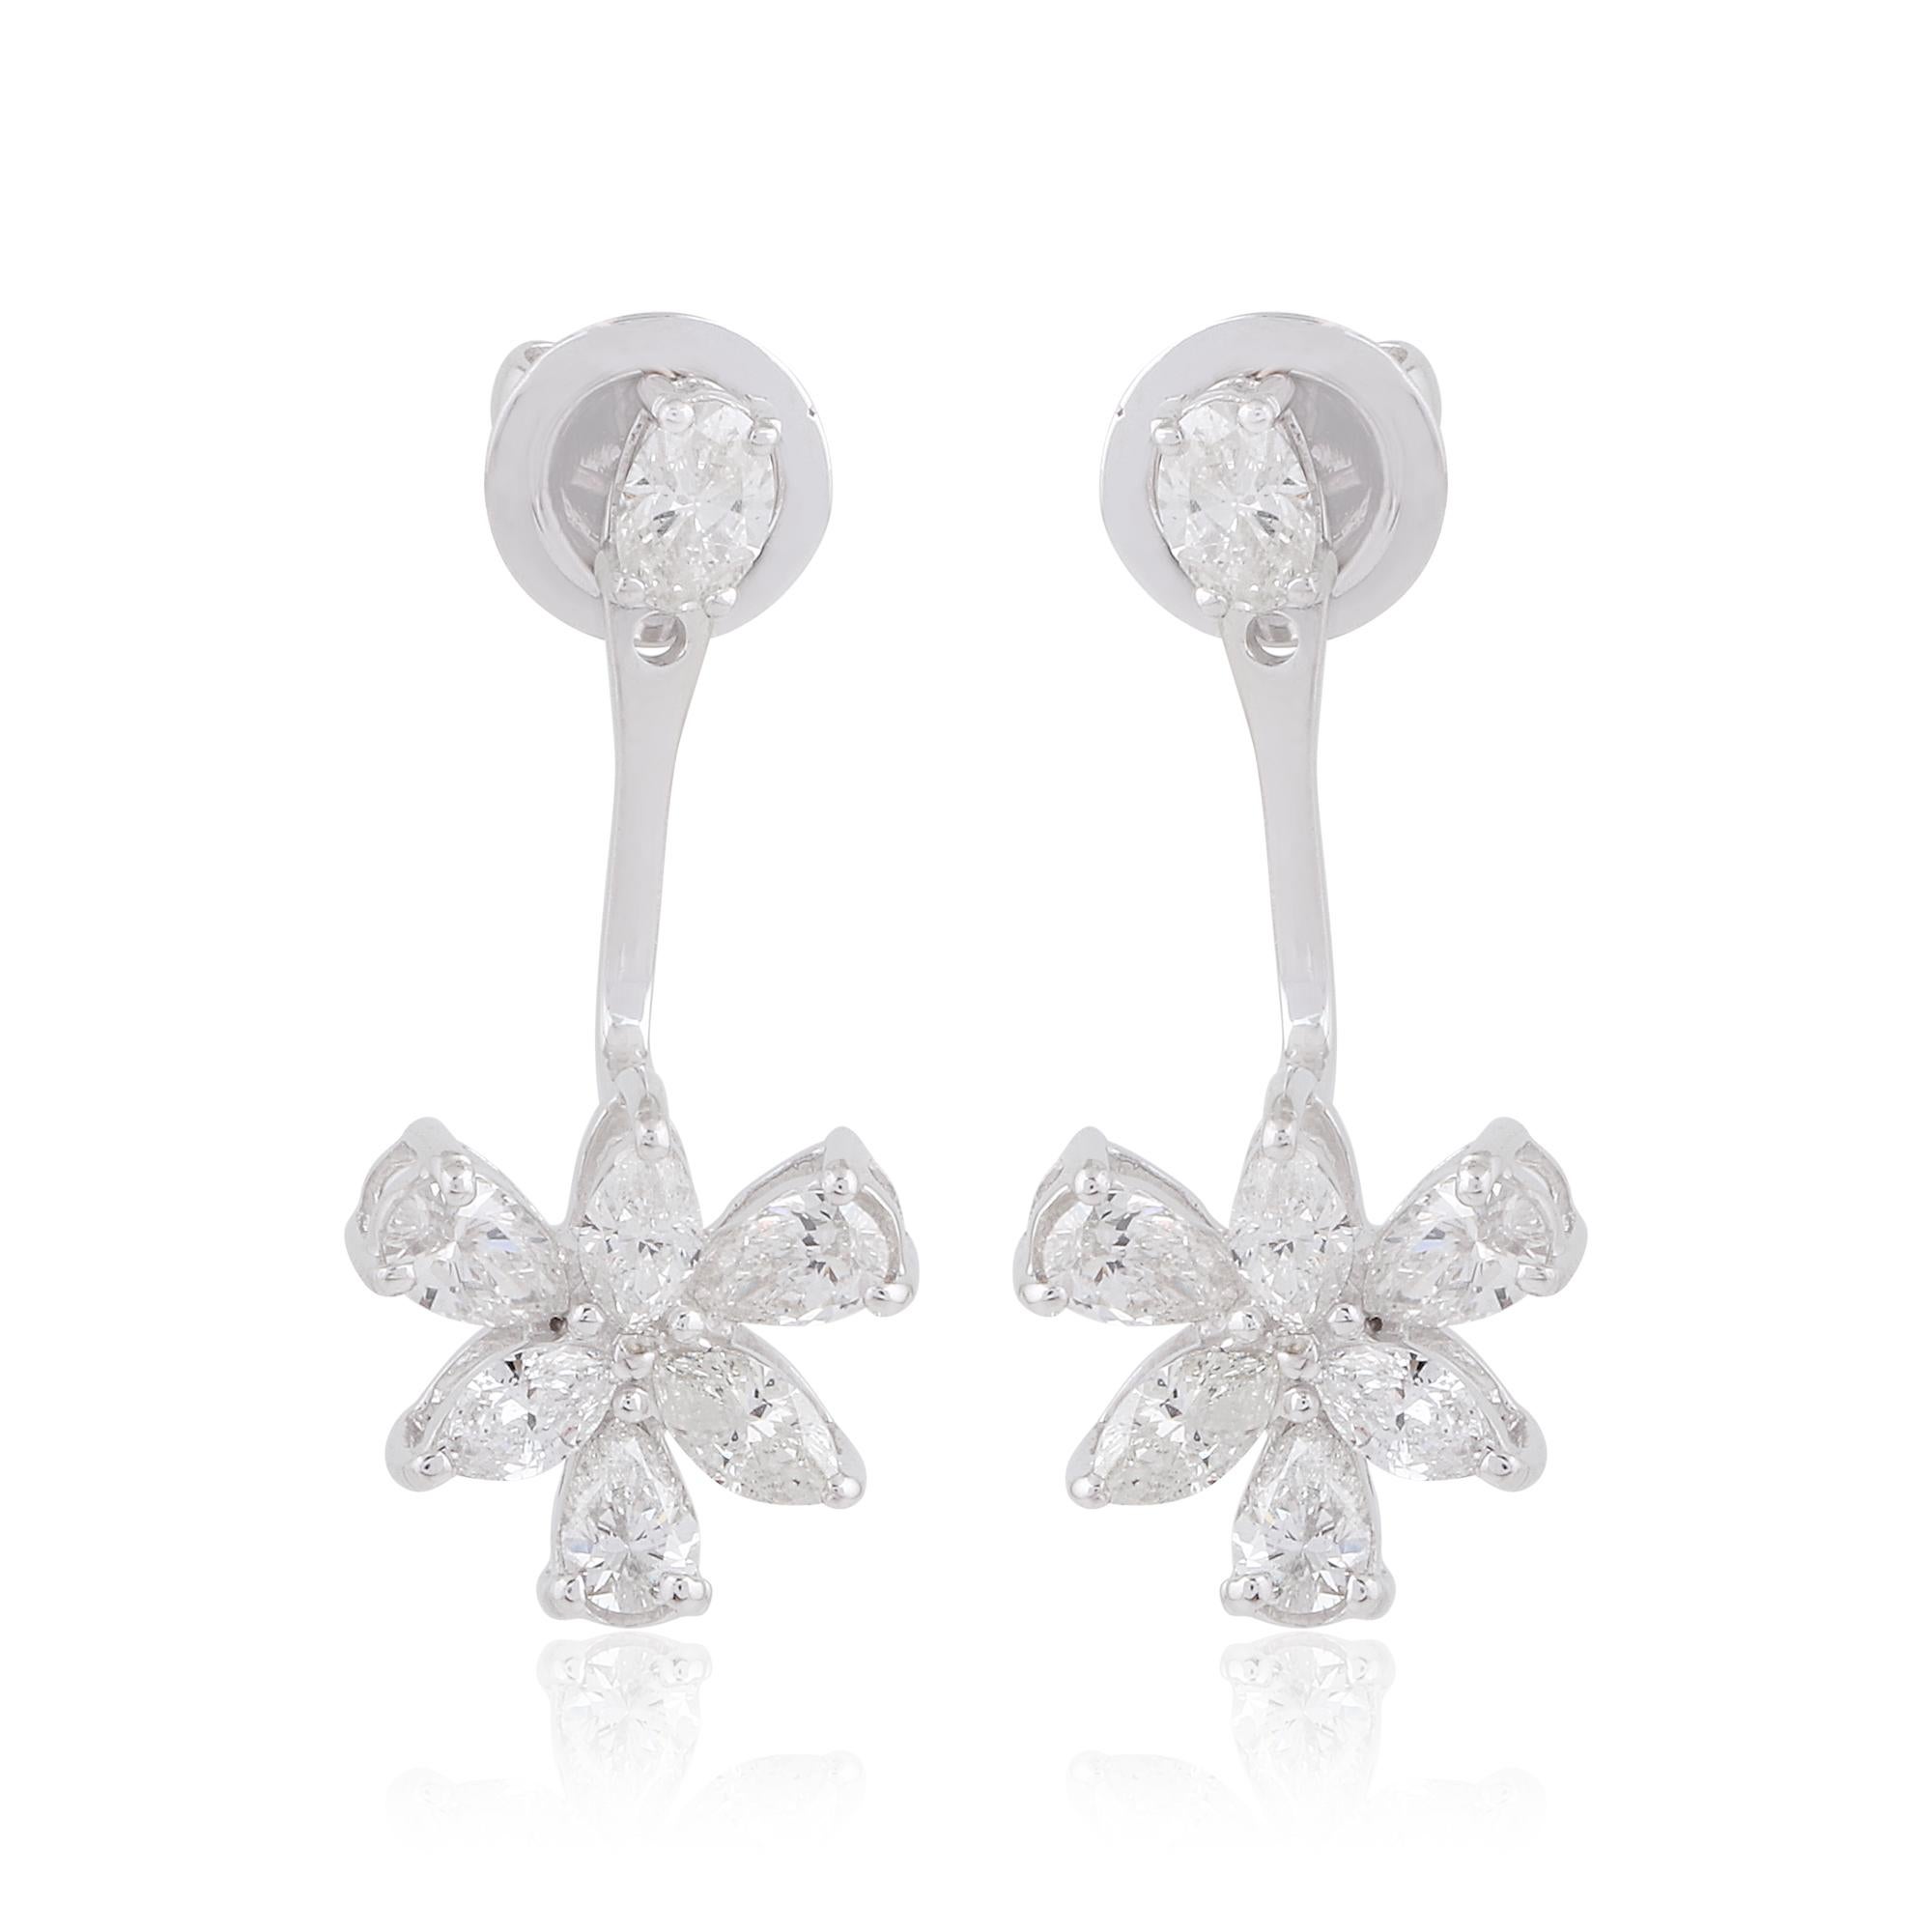 Crafted with meticulous attention to detail, these earrings are a testament to the skill and artistry of master jewelers. The lustrous 18 Karat White Gold setting provides the perfect backdrop for the diamonds, enhancing their natural beauty and